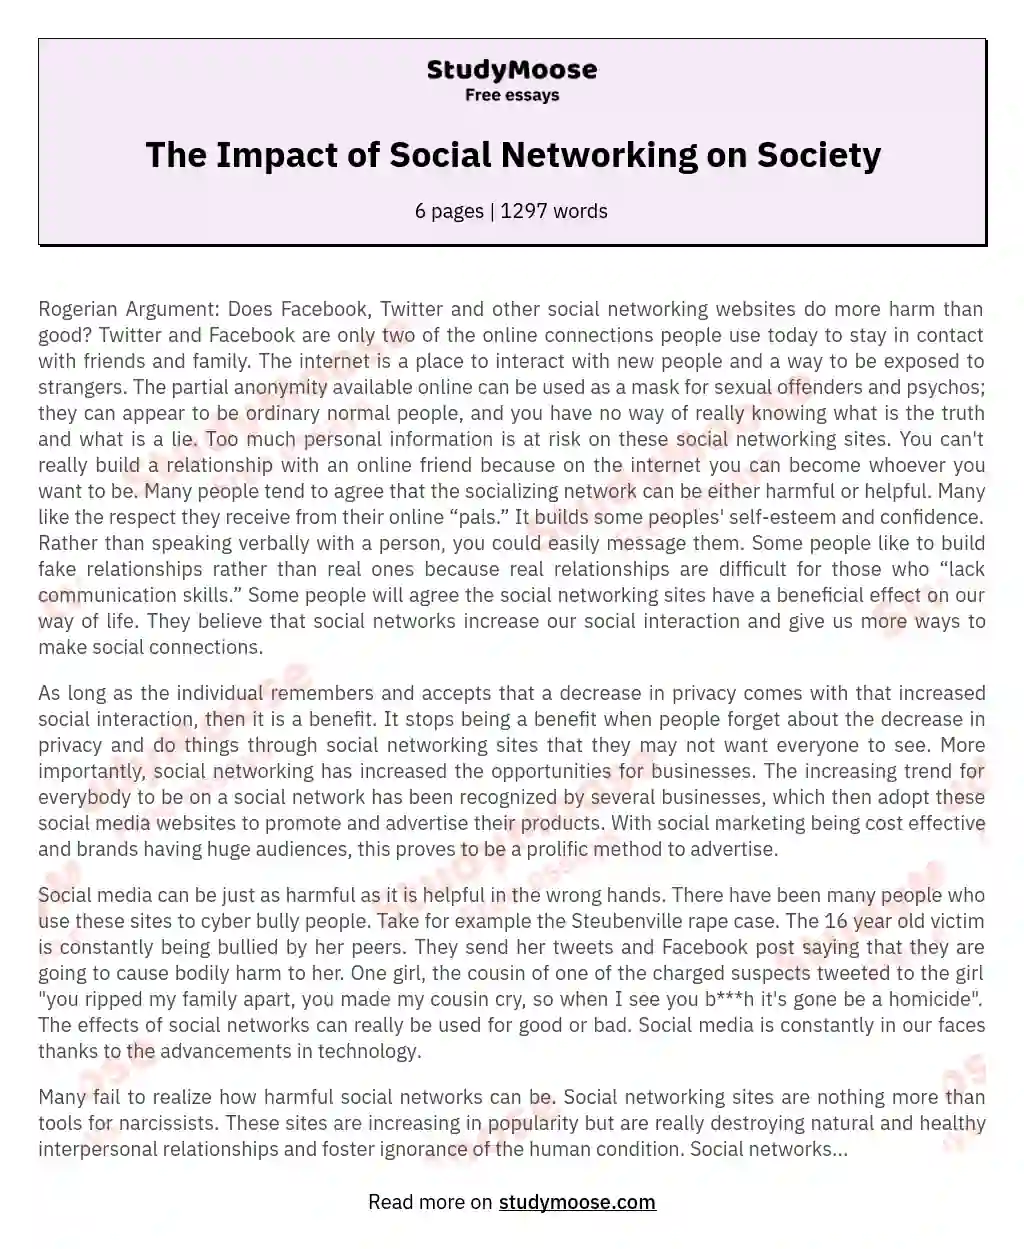 The Impact of Social Networking on Society essay